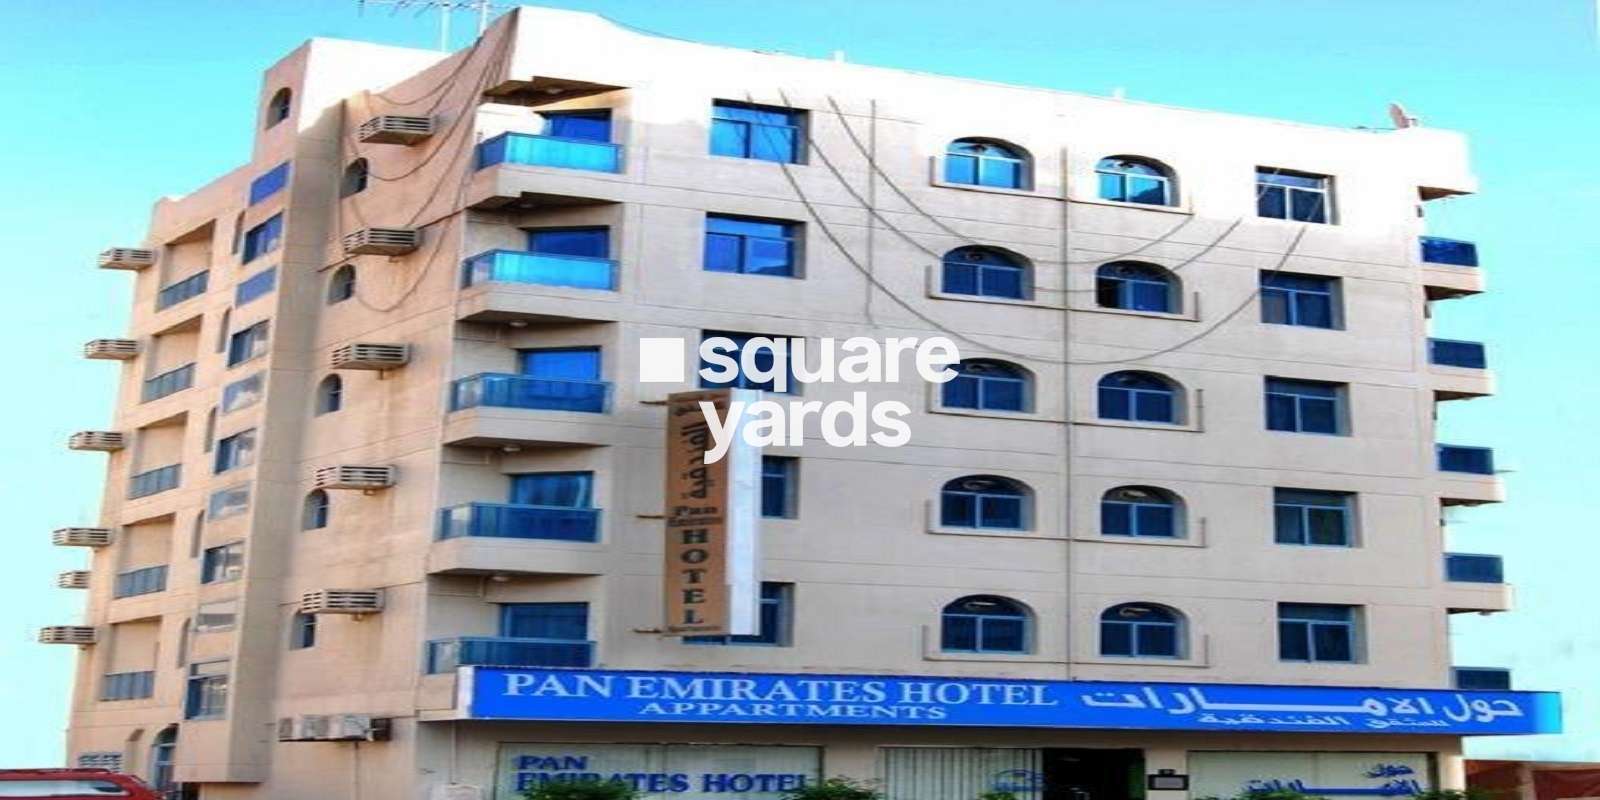 Pan Emirates Hotel Apartments Cover Image